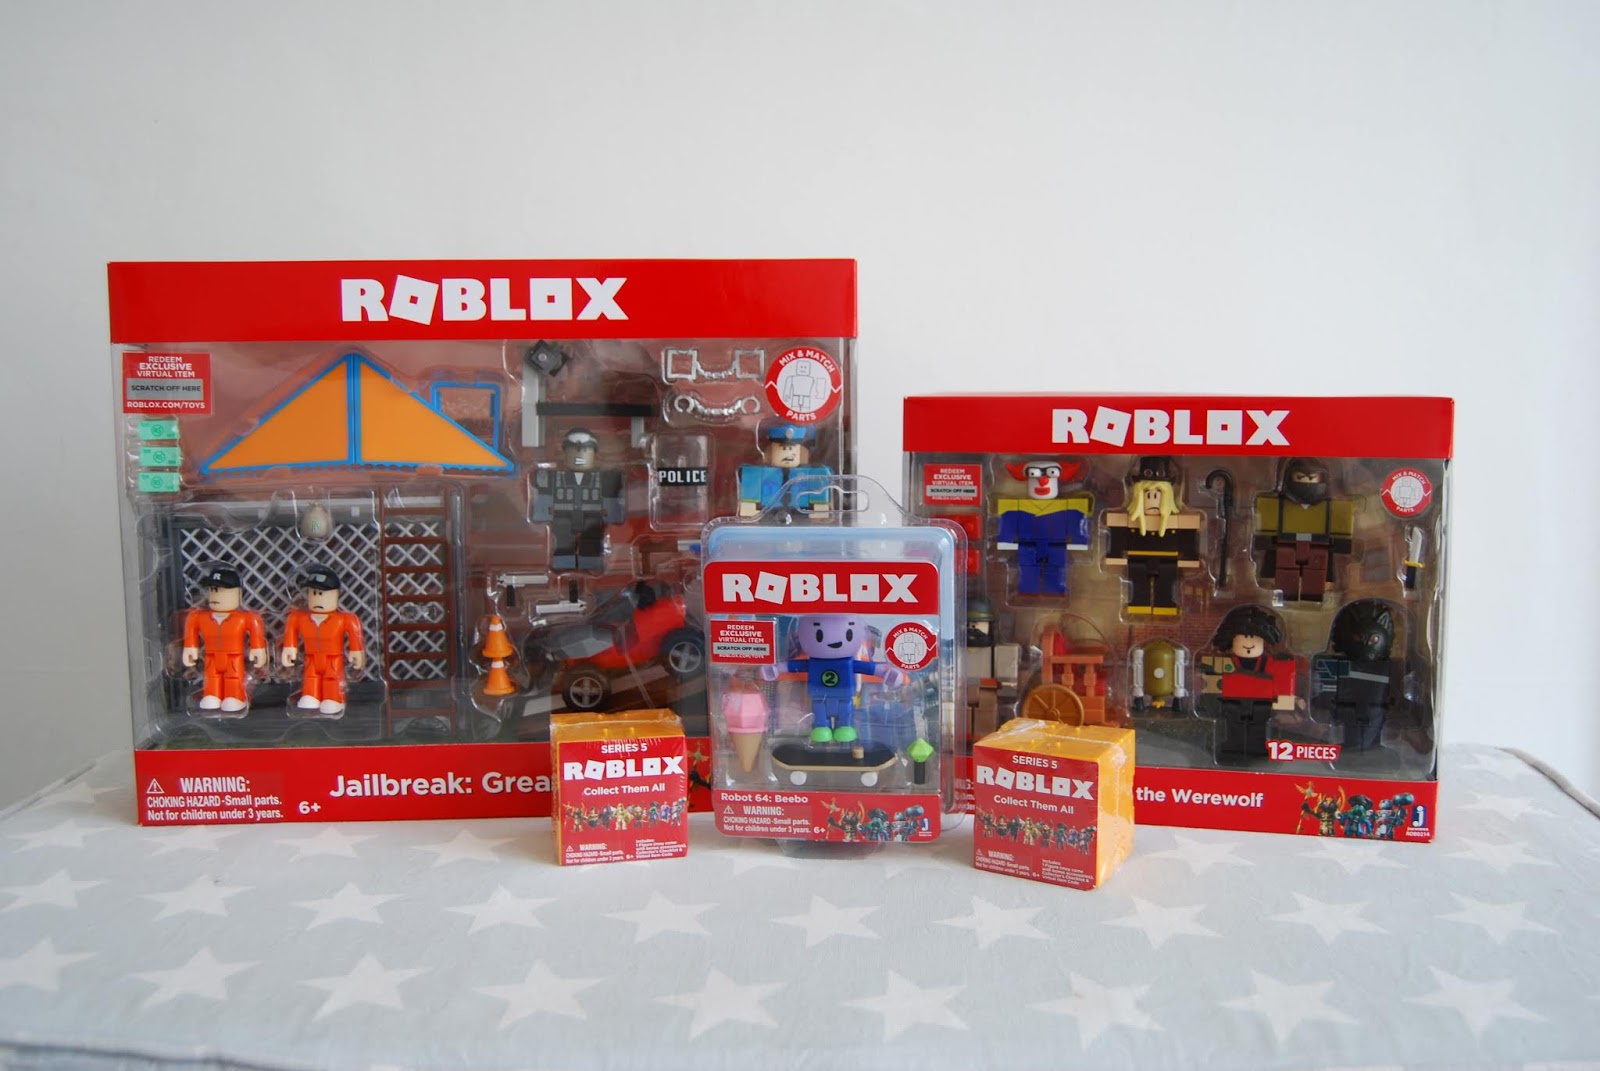 Chic Geek Diary Roblox Series 5 Toys Review Giveaway - escape jail for your love new roblox